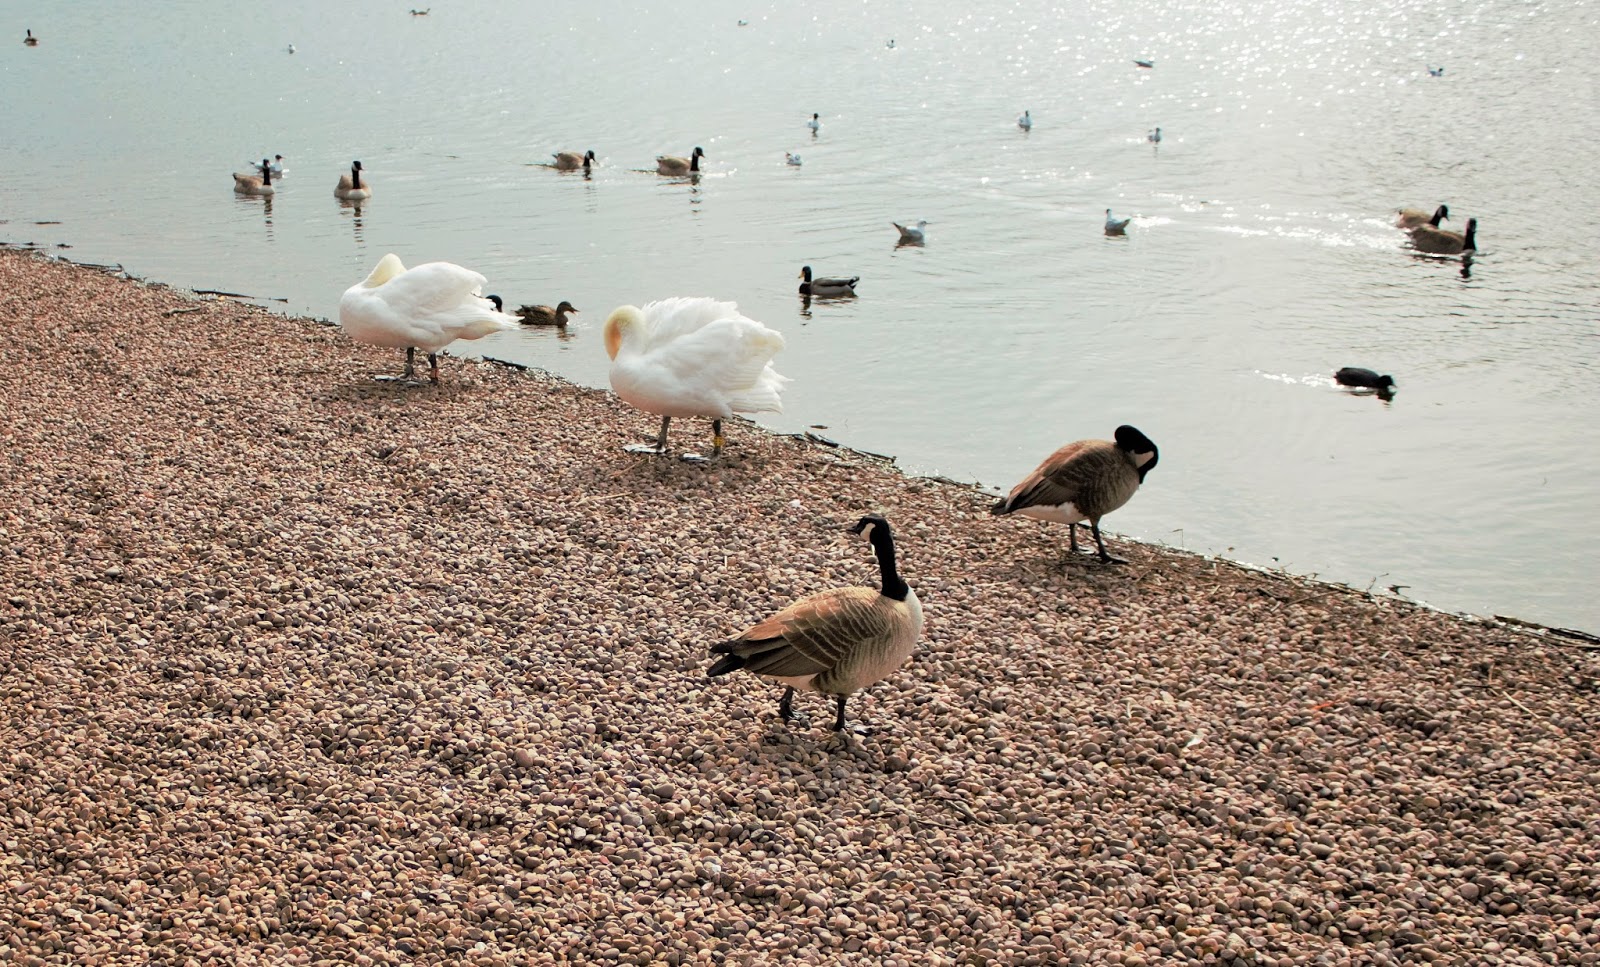 Ducks and Swans